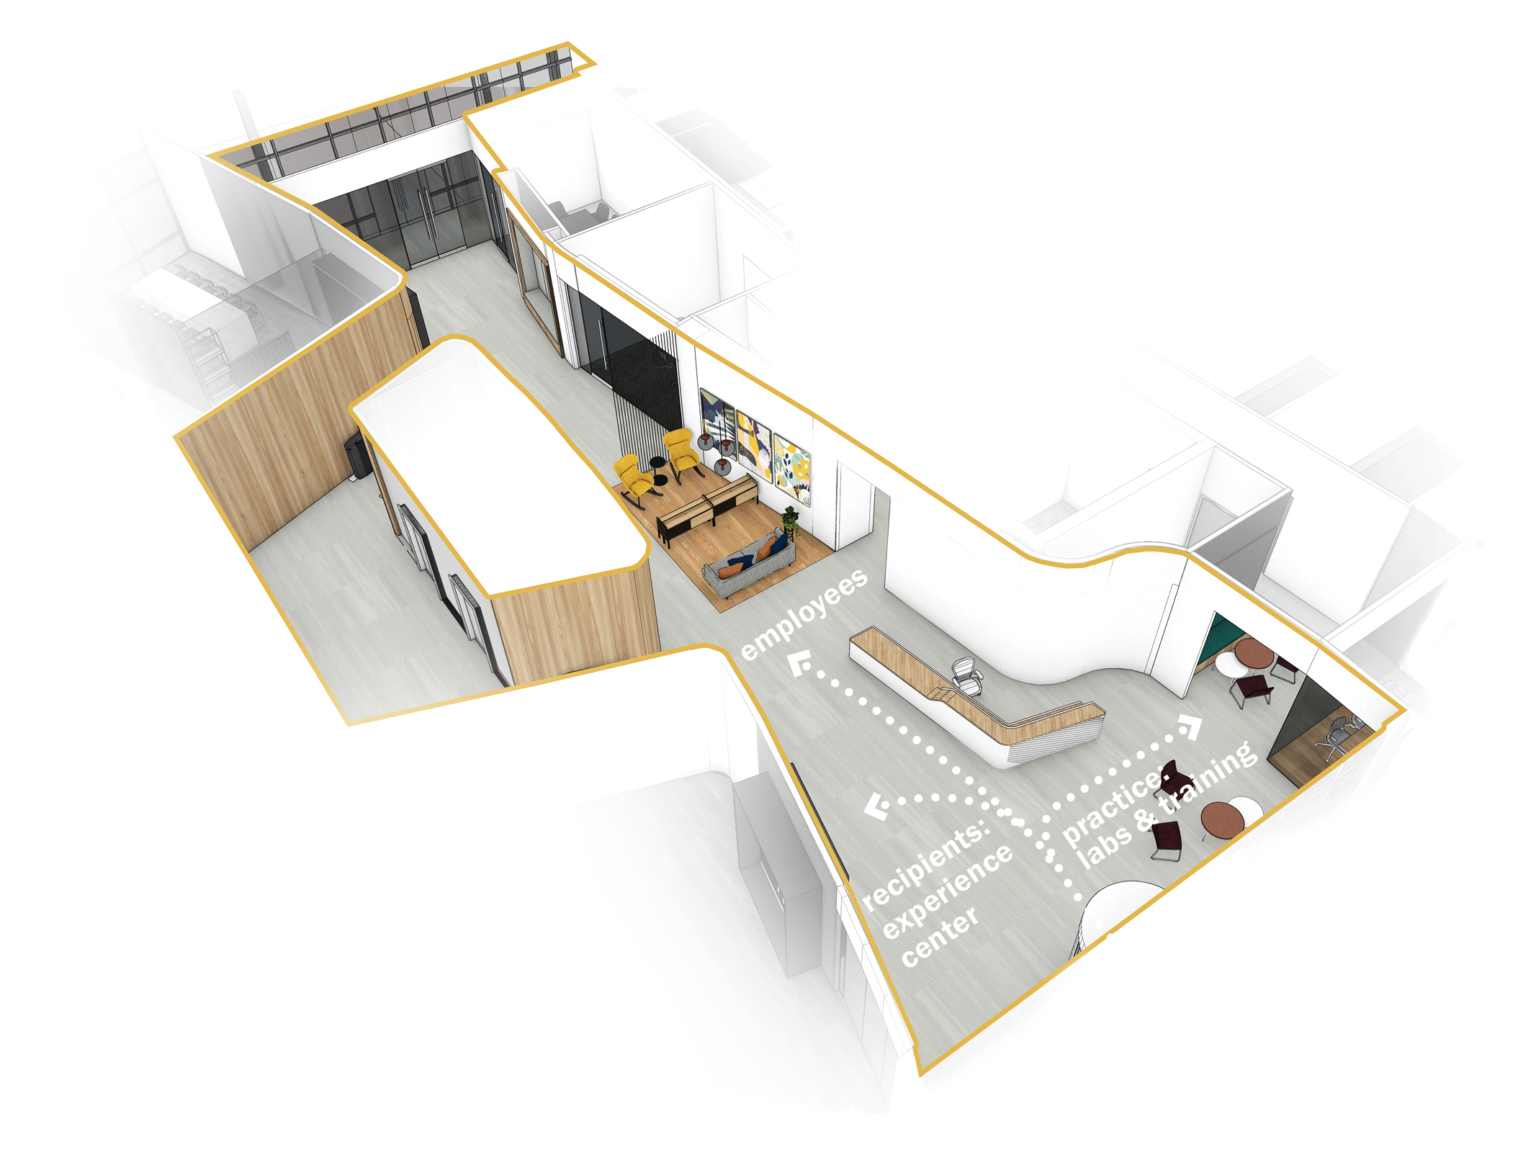 Rendering of white office lobby with wood accents from aerial view with labeled arrows of destinations of potential pathways